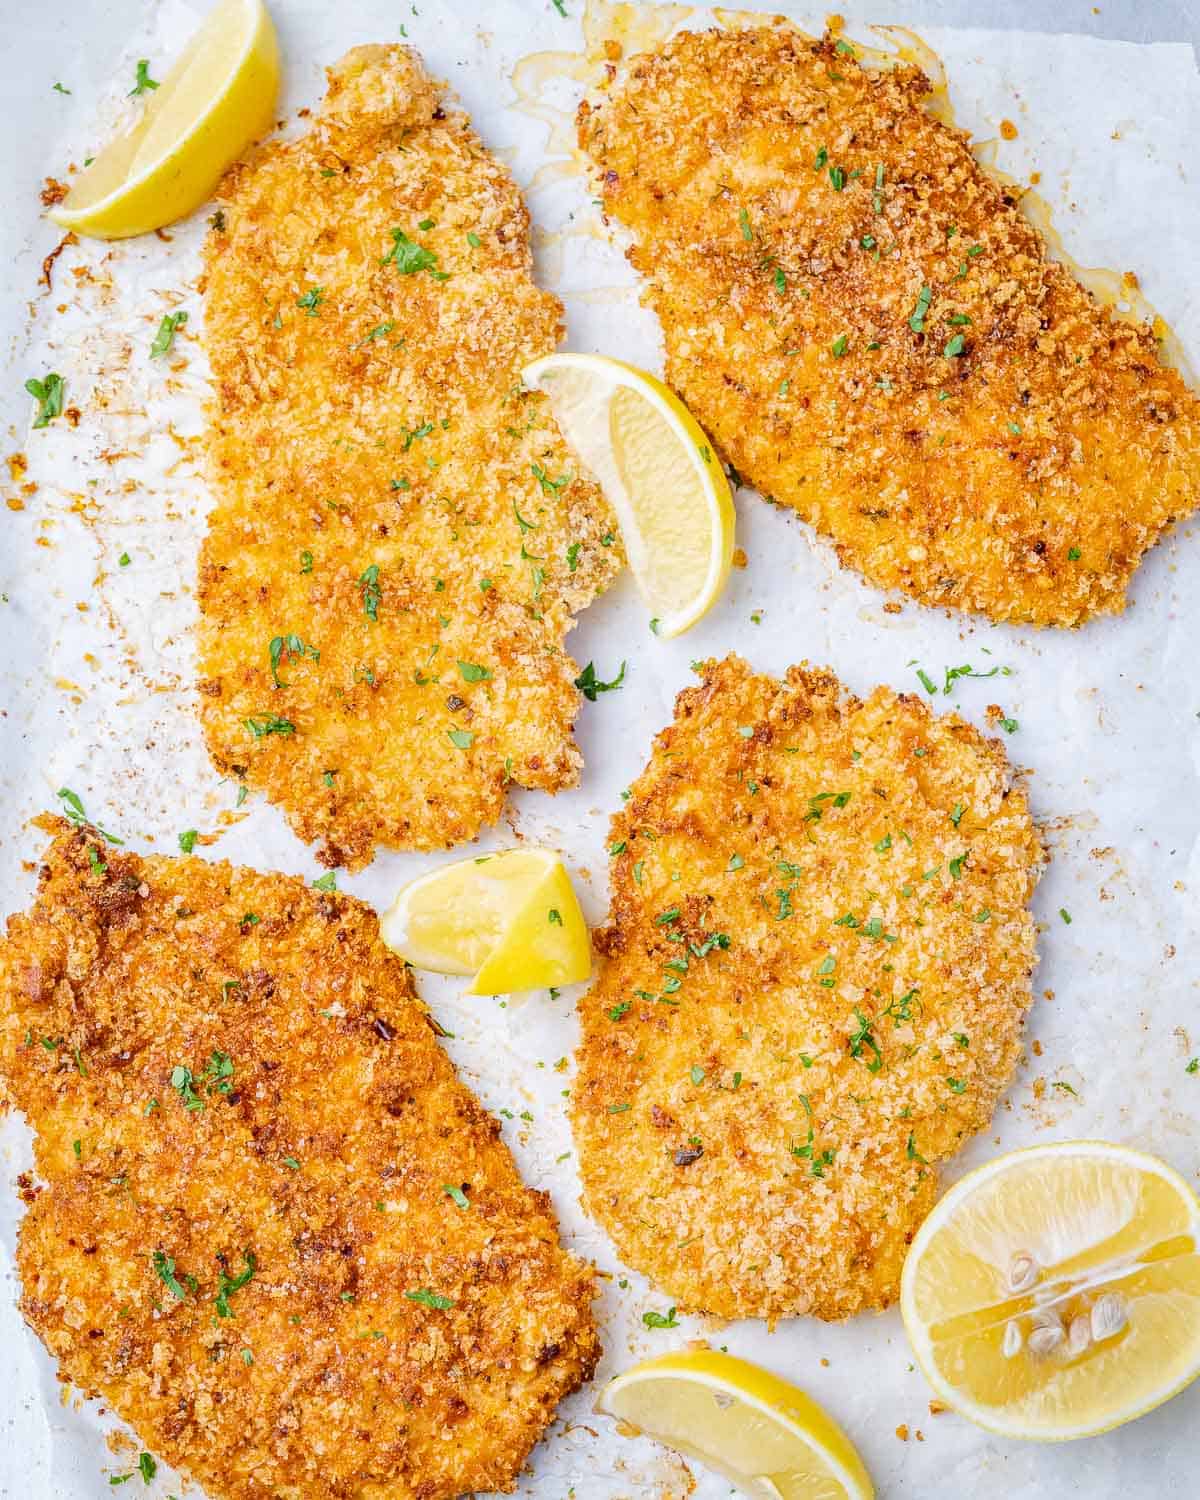 top view of parmesan baked chicken breasts with lemon wedges